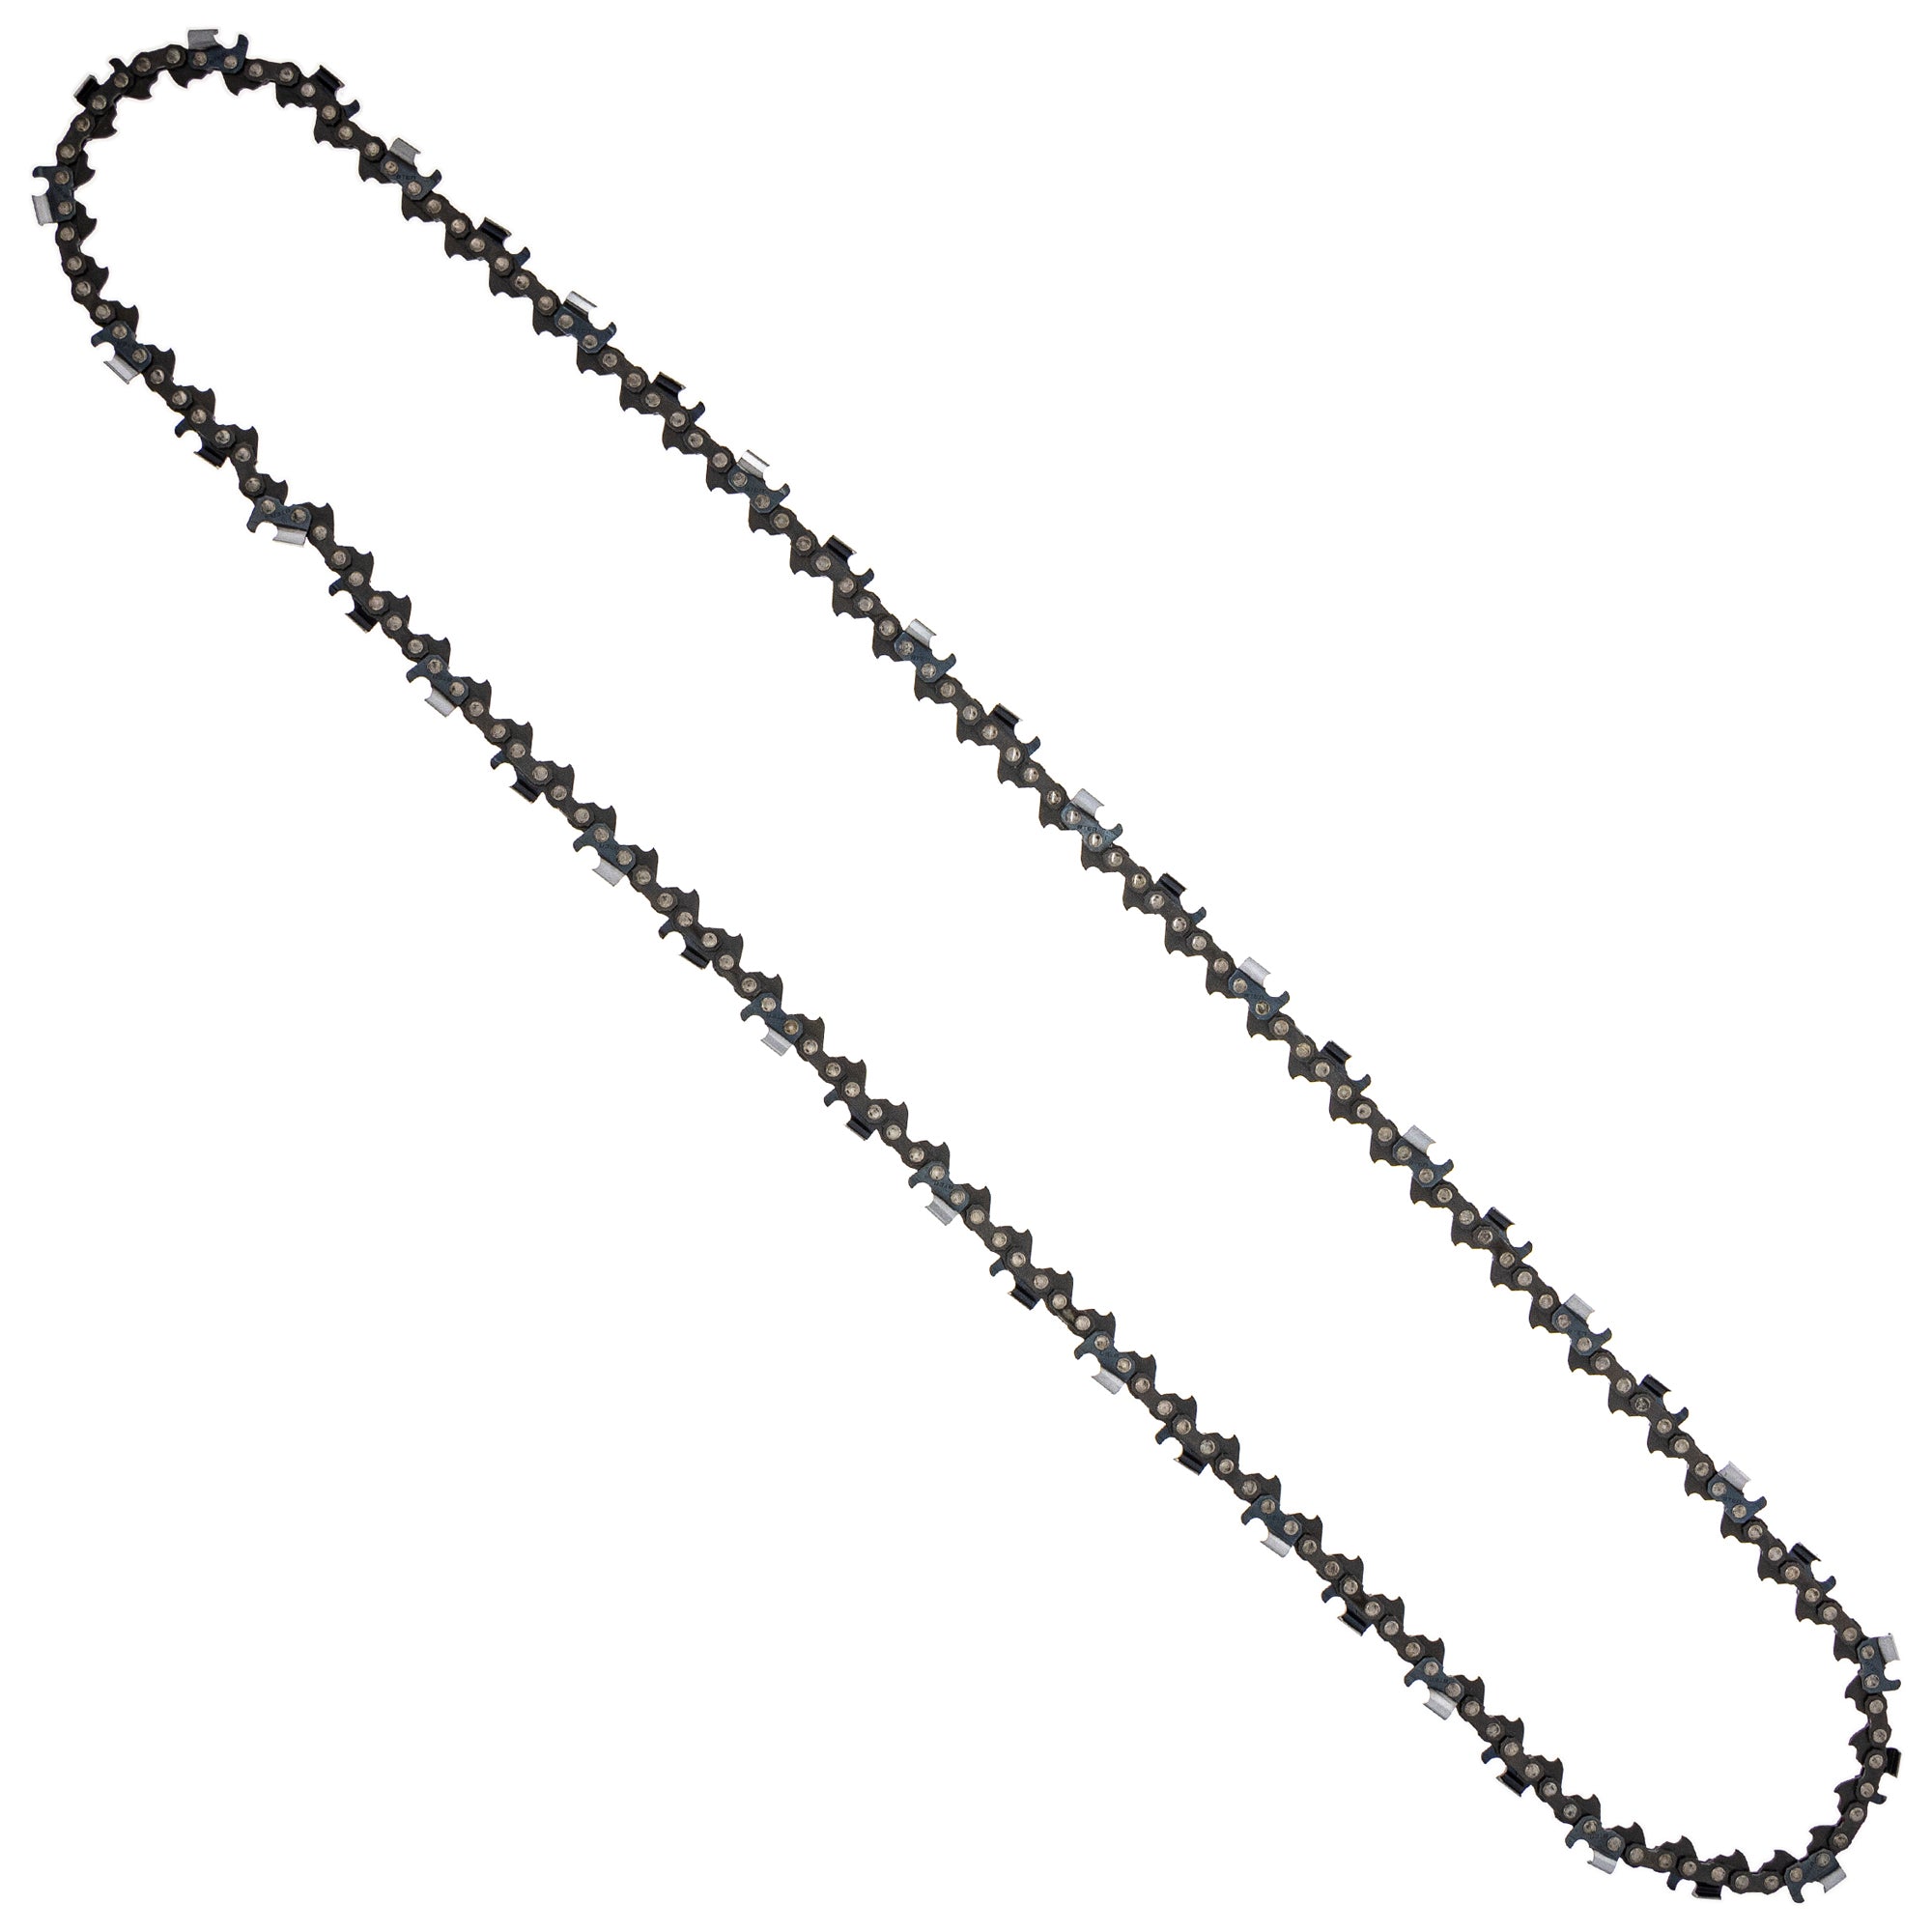 8TEN 810-CCC2212H Chain 3-Pack for zOTHER Oregon MS 066 064 056